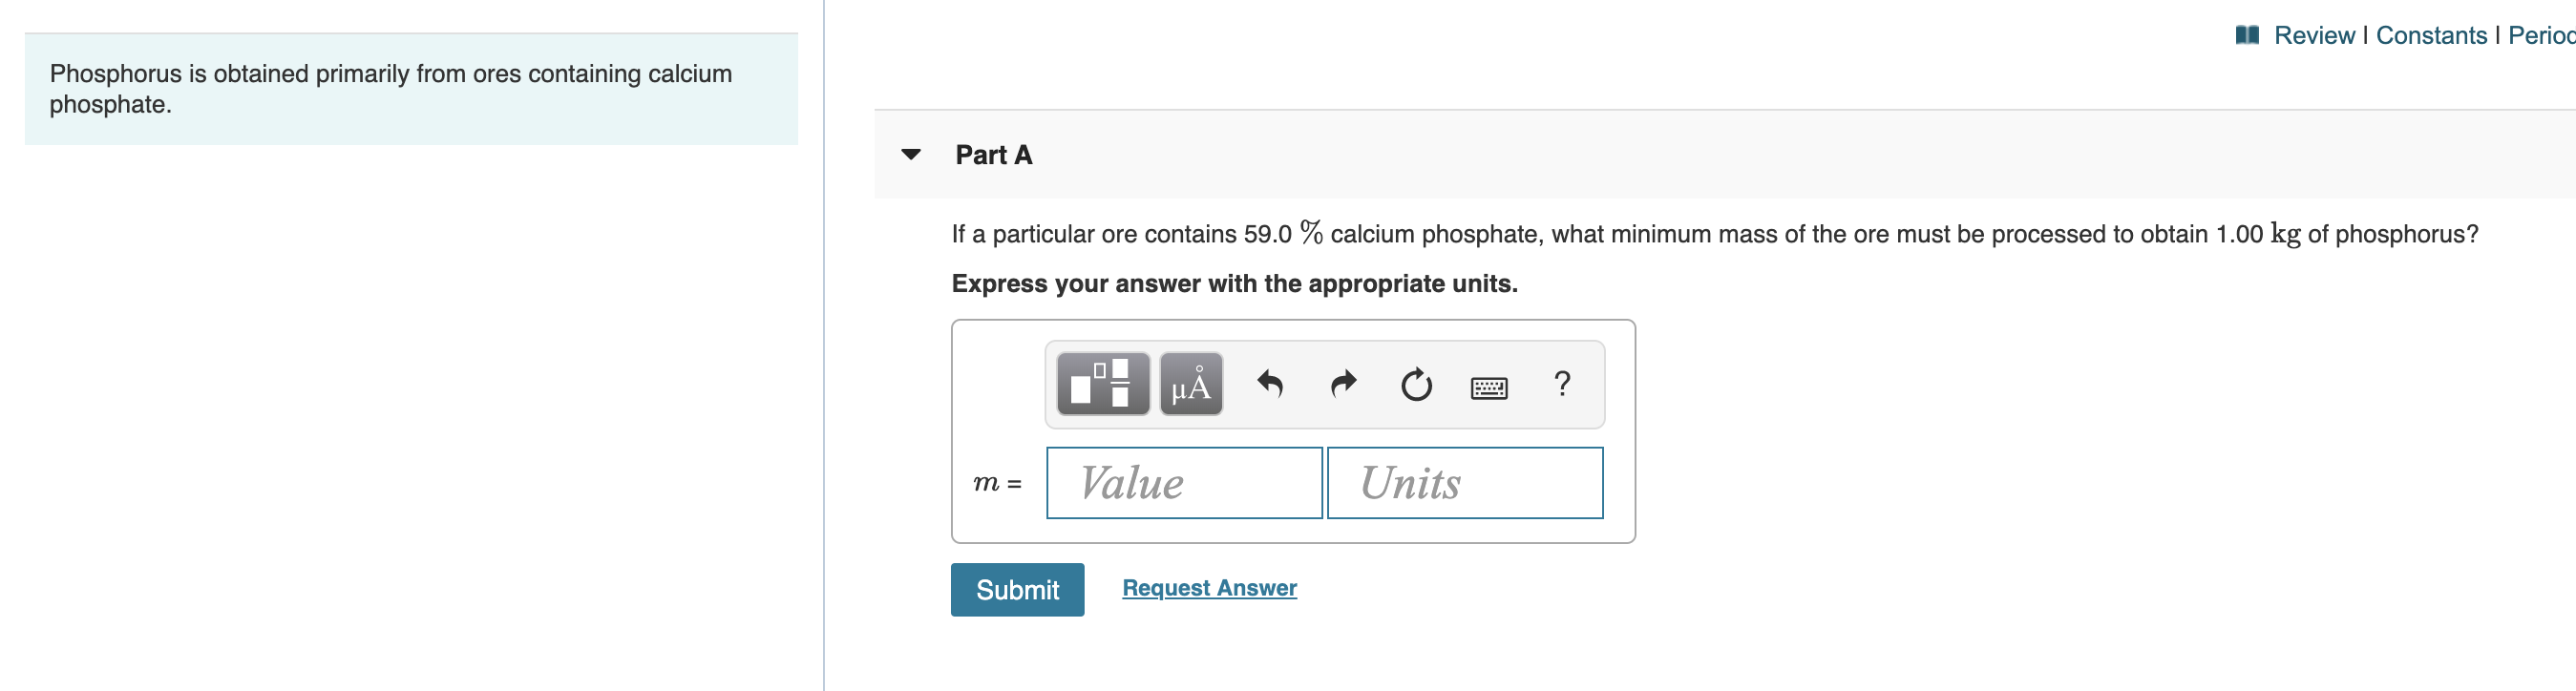 Review I Constants I Perioc
Phosphorus is obtained primarily from ores containing calcium
phosphate.
Part A
calcium phosphate, what minimum mass of the ore must be processed to obtain 1.00 kg of phosphorus?
If a particular ore contains 59.0
Express your answer with the appropriate units.
?
HA
Value
Units
m =
Request Answer
Submit
